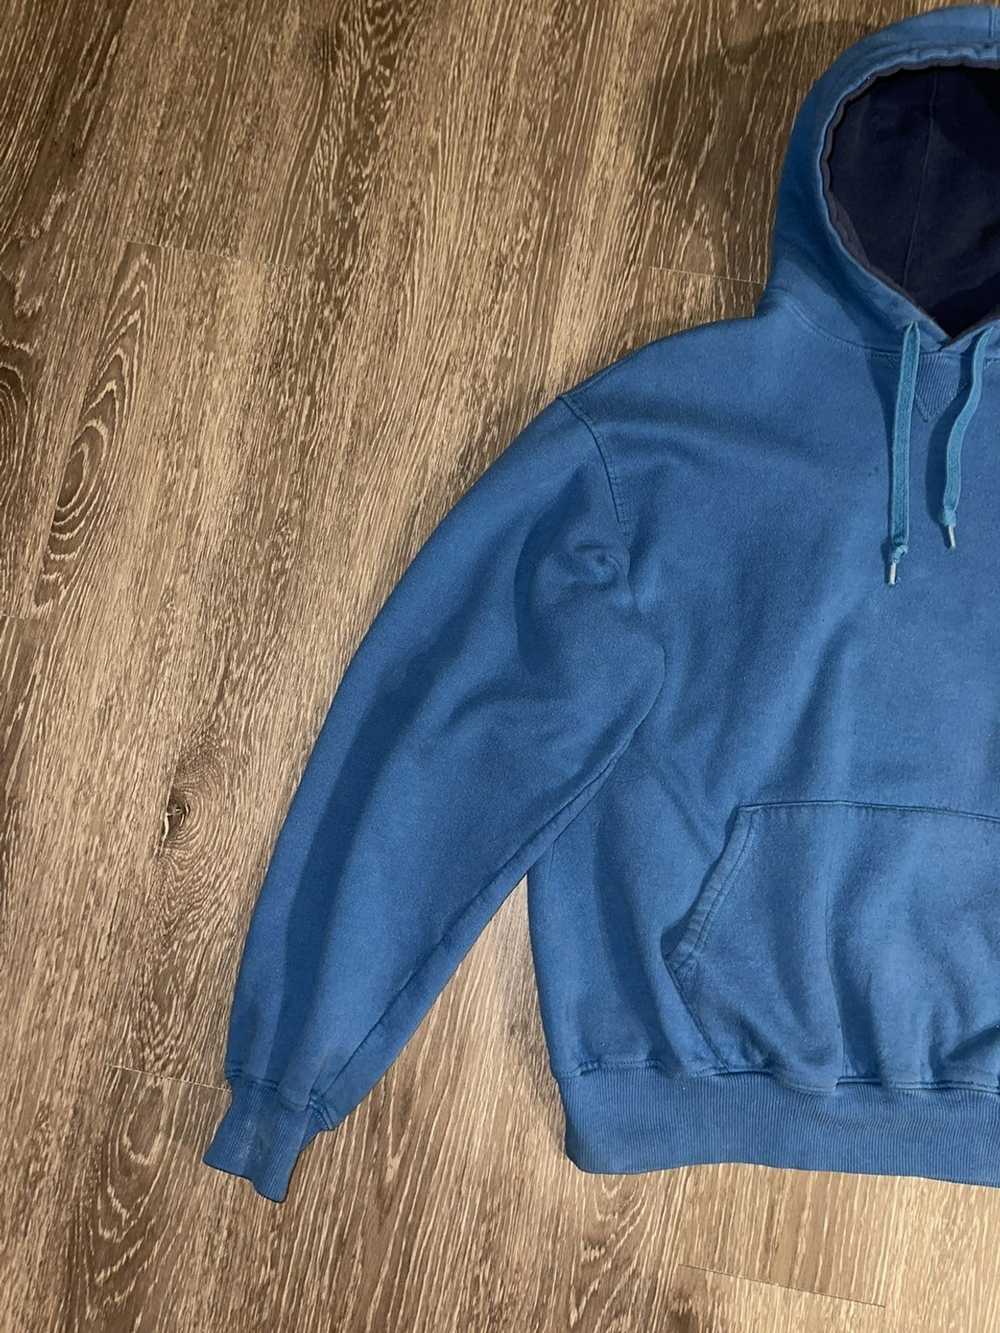 Champion Champion faded hoodie teal distressed 19… - image 1